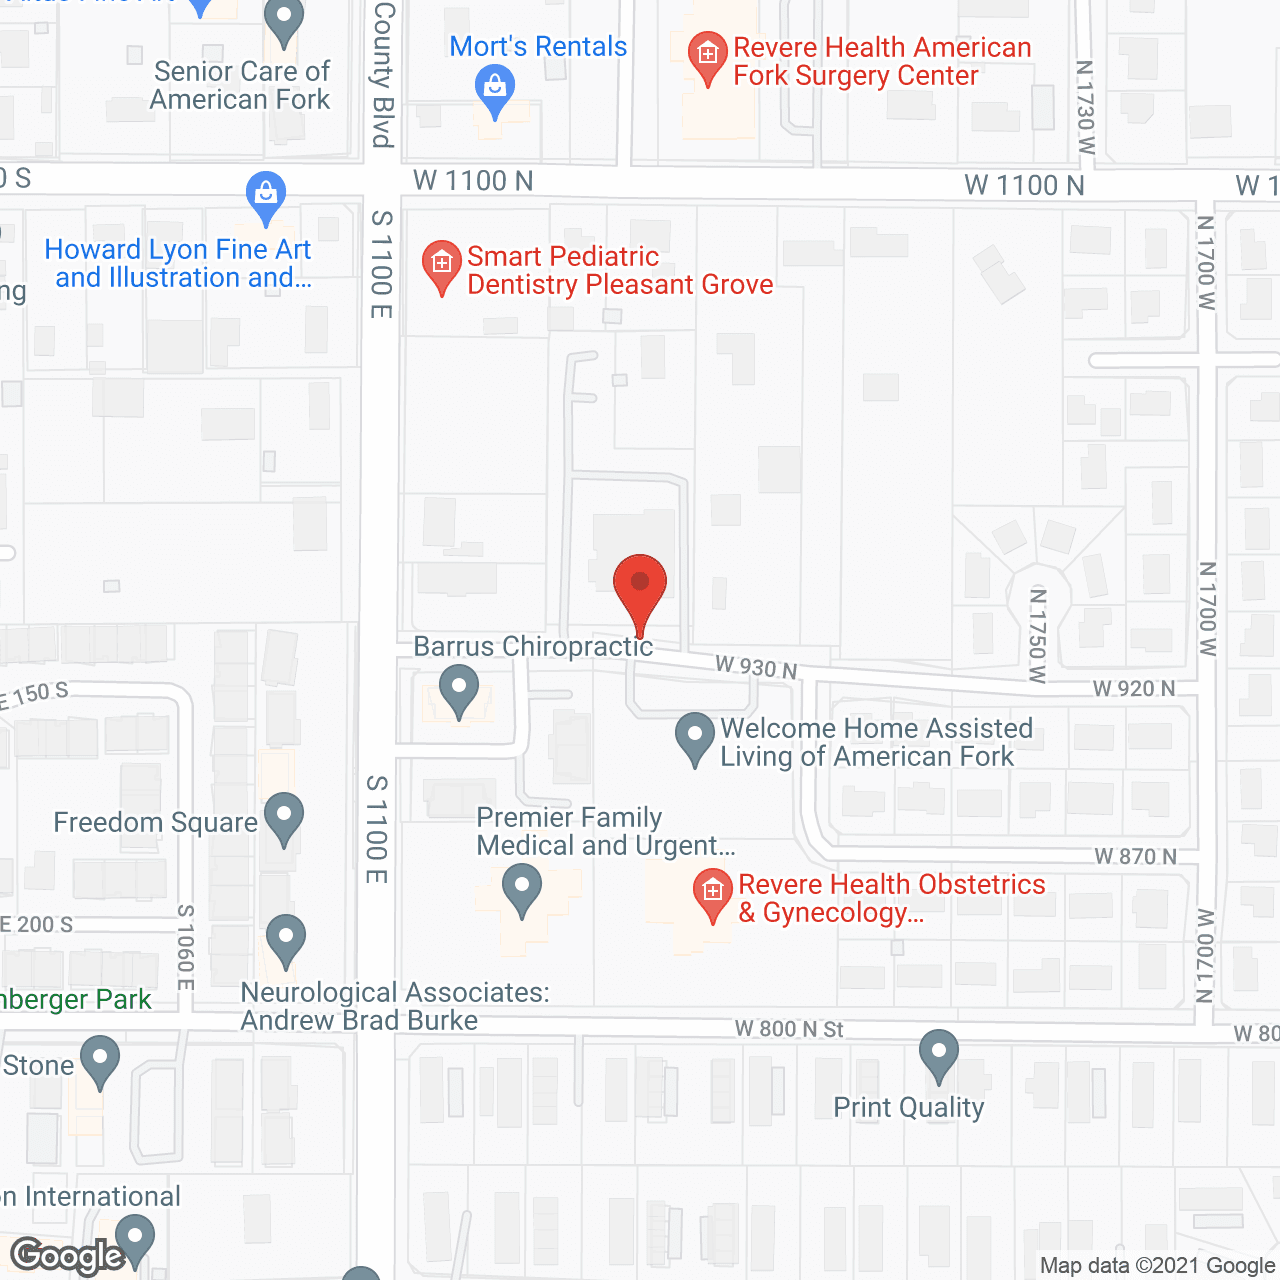 Welcome Home Assisted Living of American Fork in google map